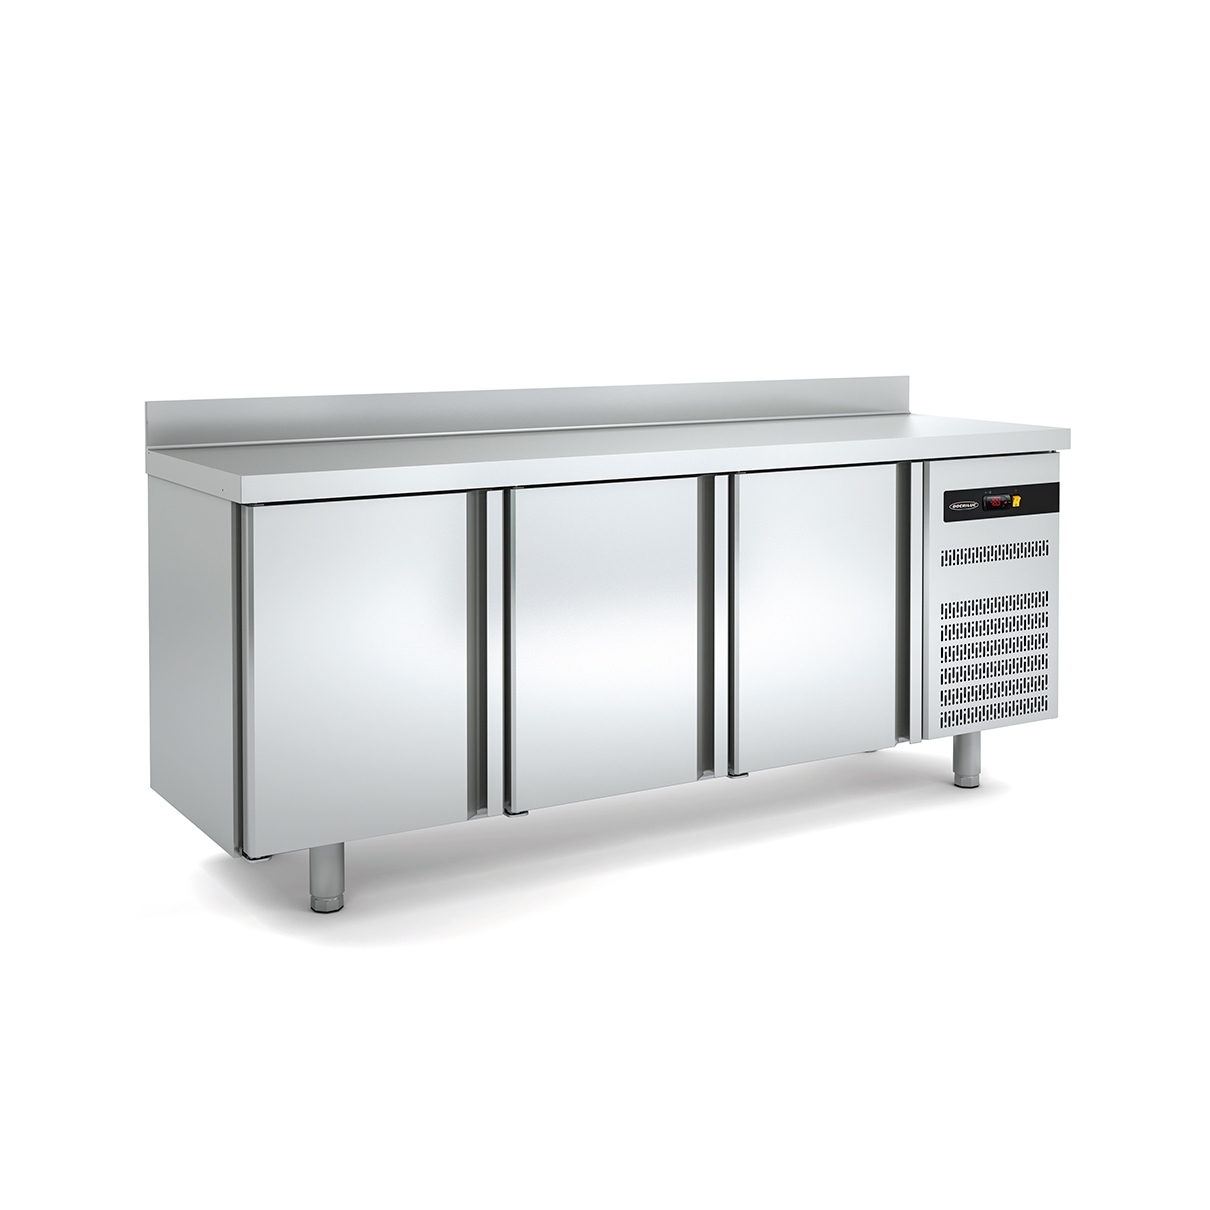 SNACK Refrigerated Counter MD